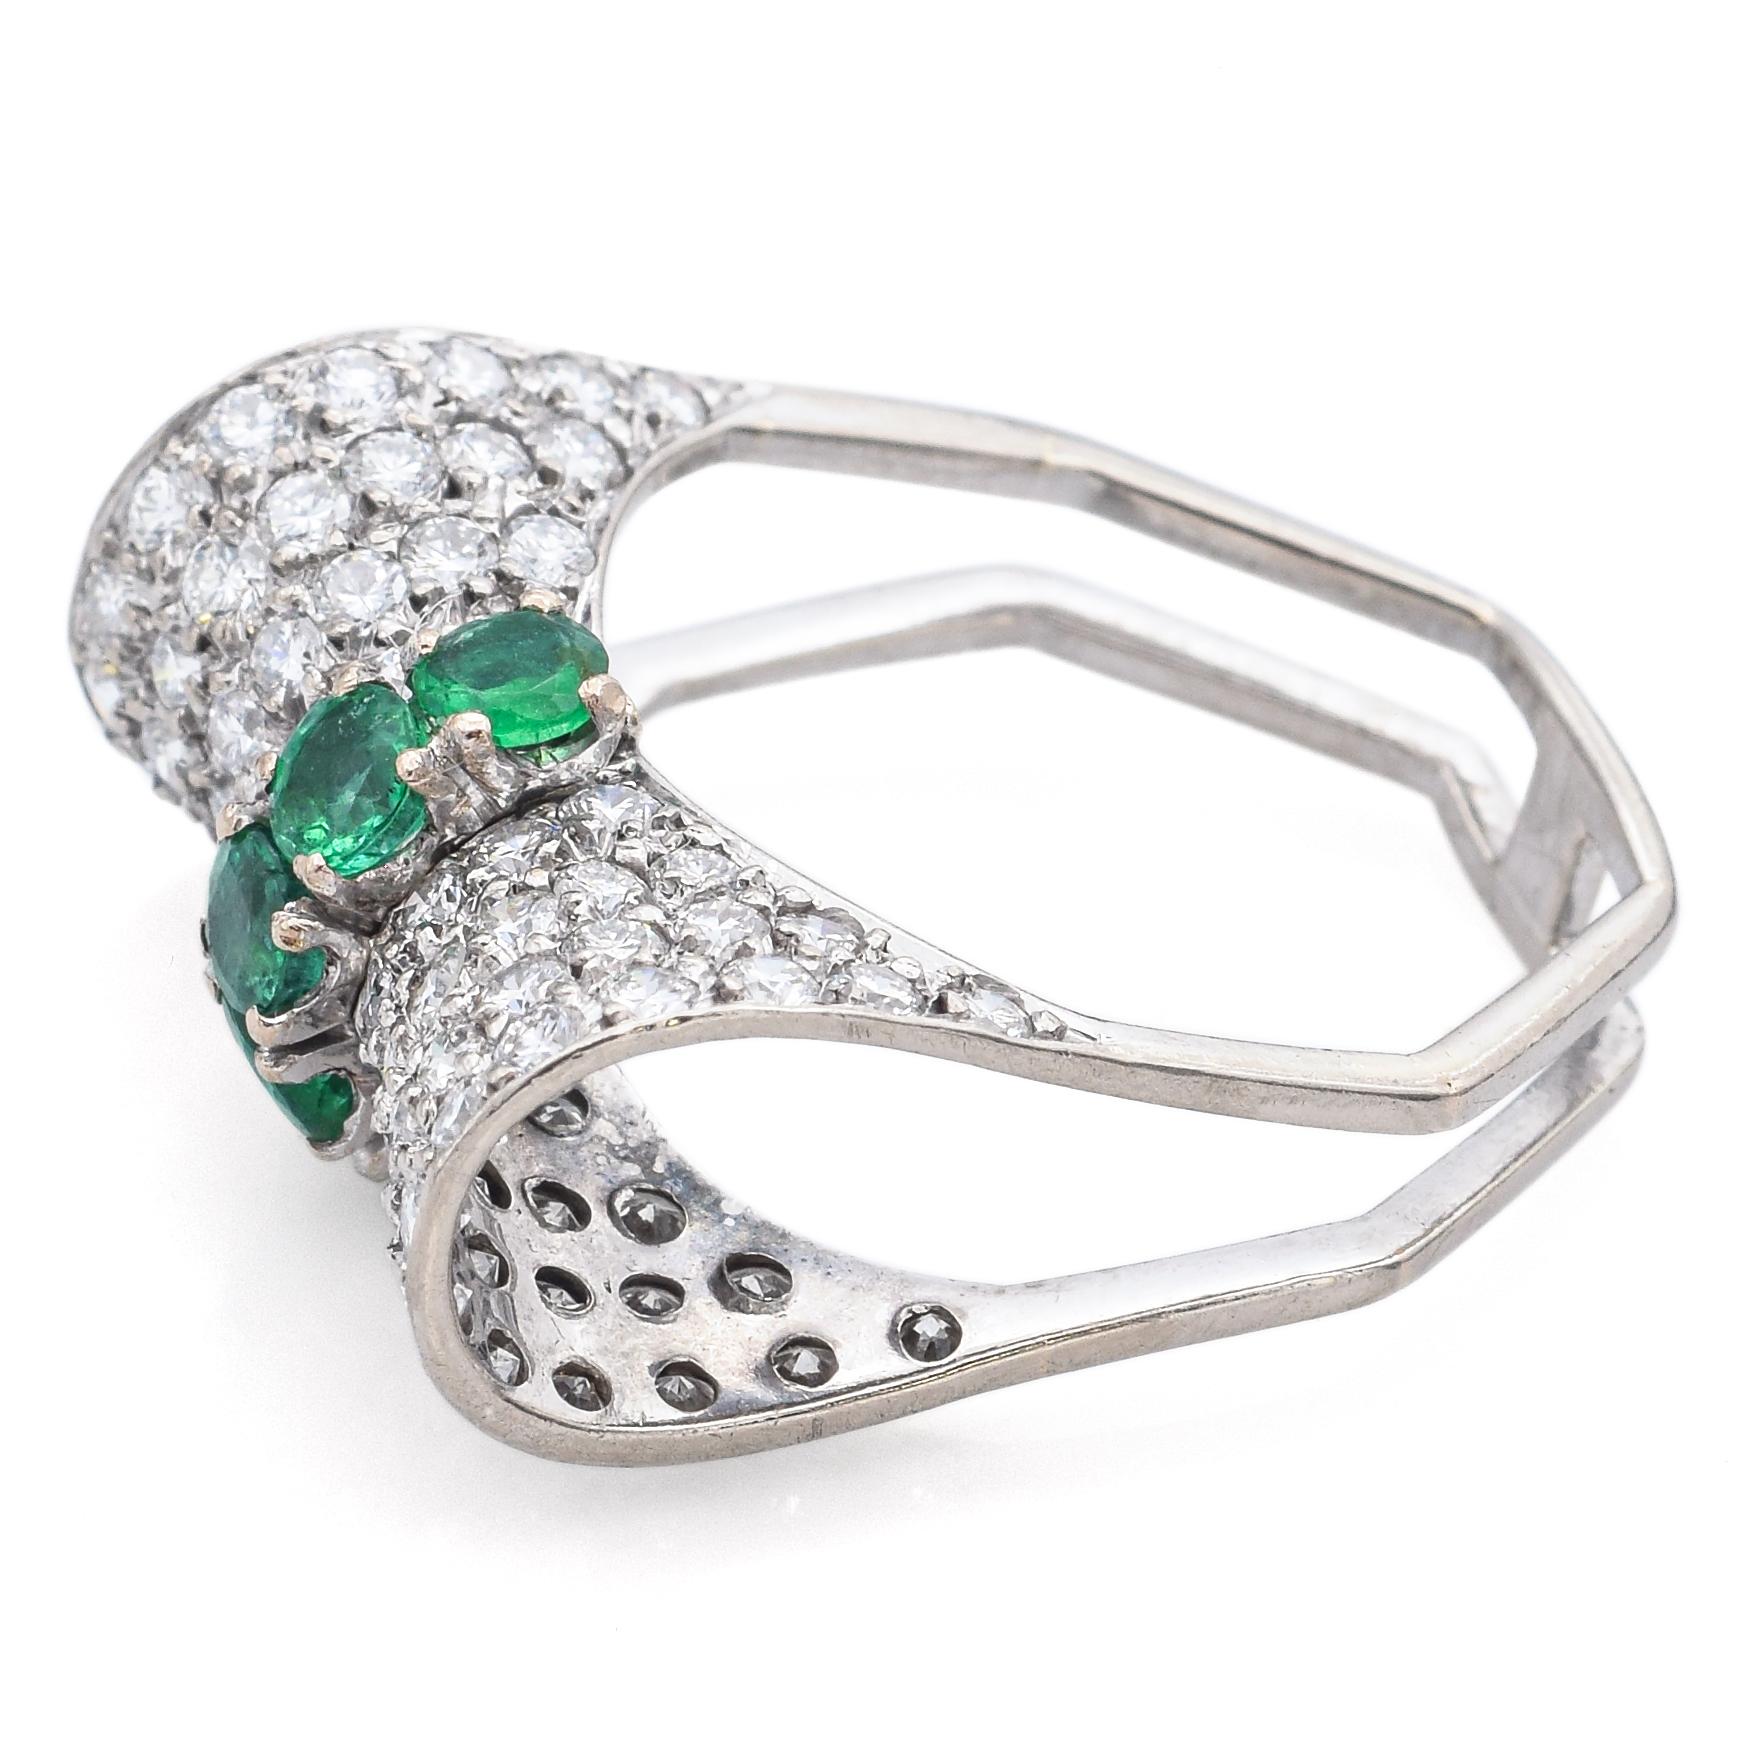 Women's or Men's H. Stern 18K White Gold Emerald & 1.60 TCW Diamond Bow Ring with Box Size 5.5